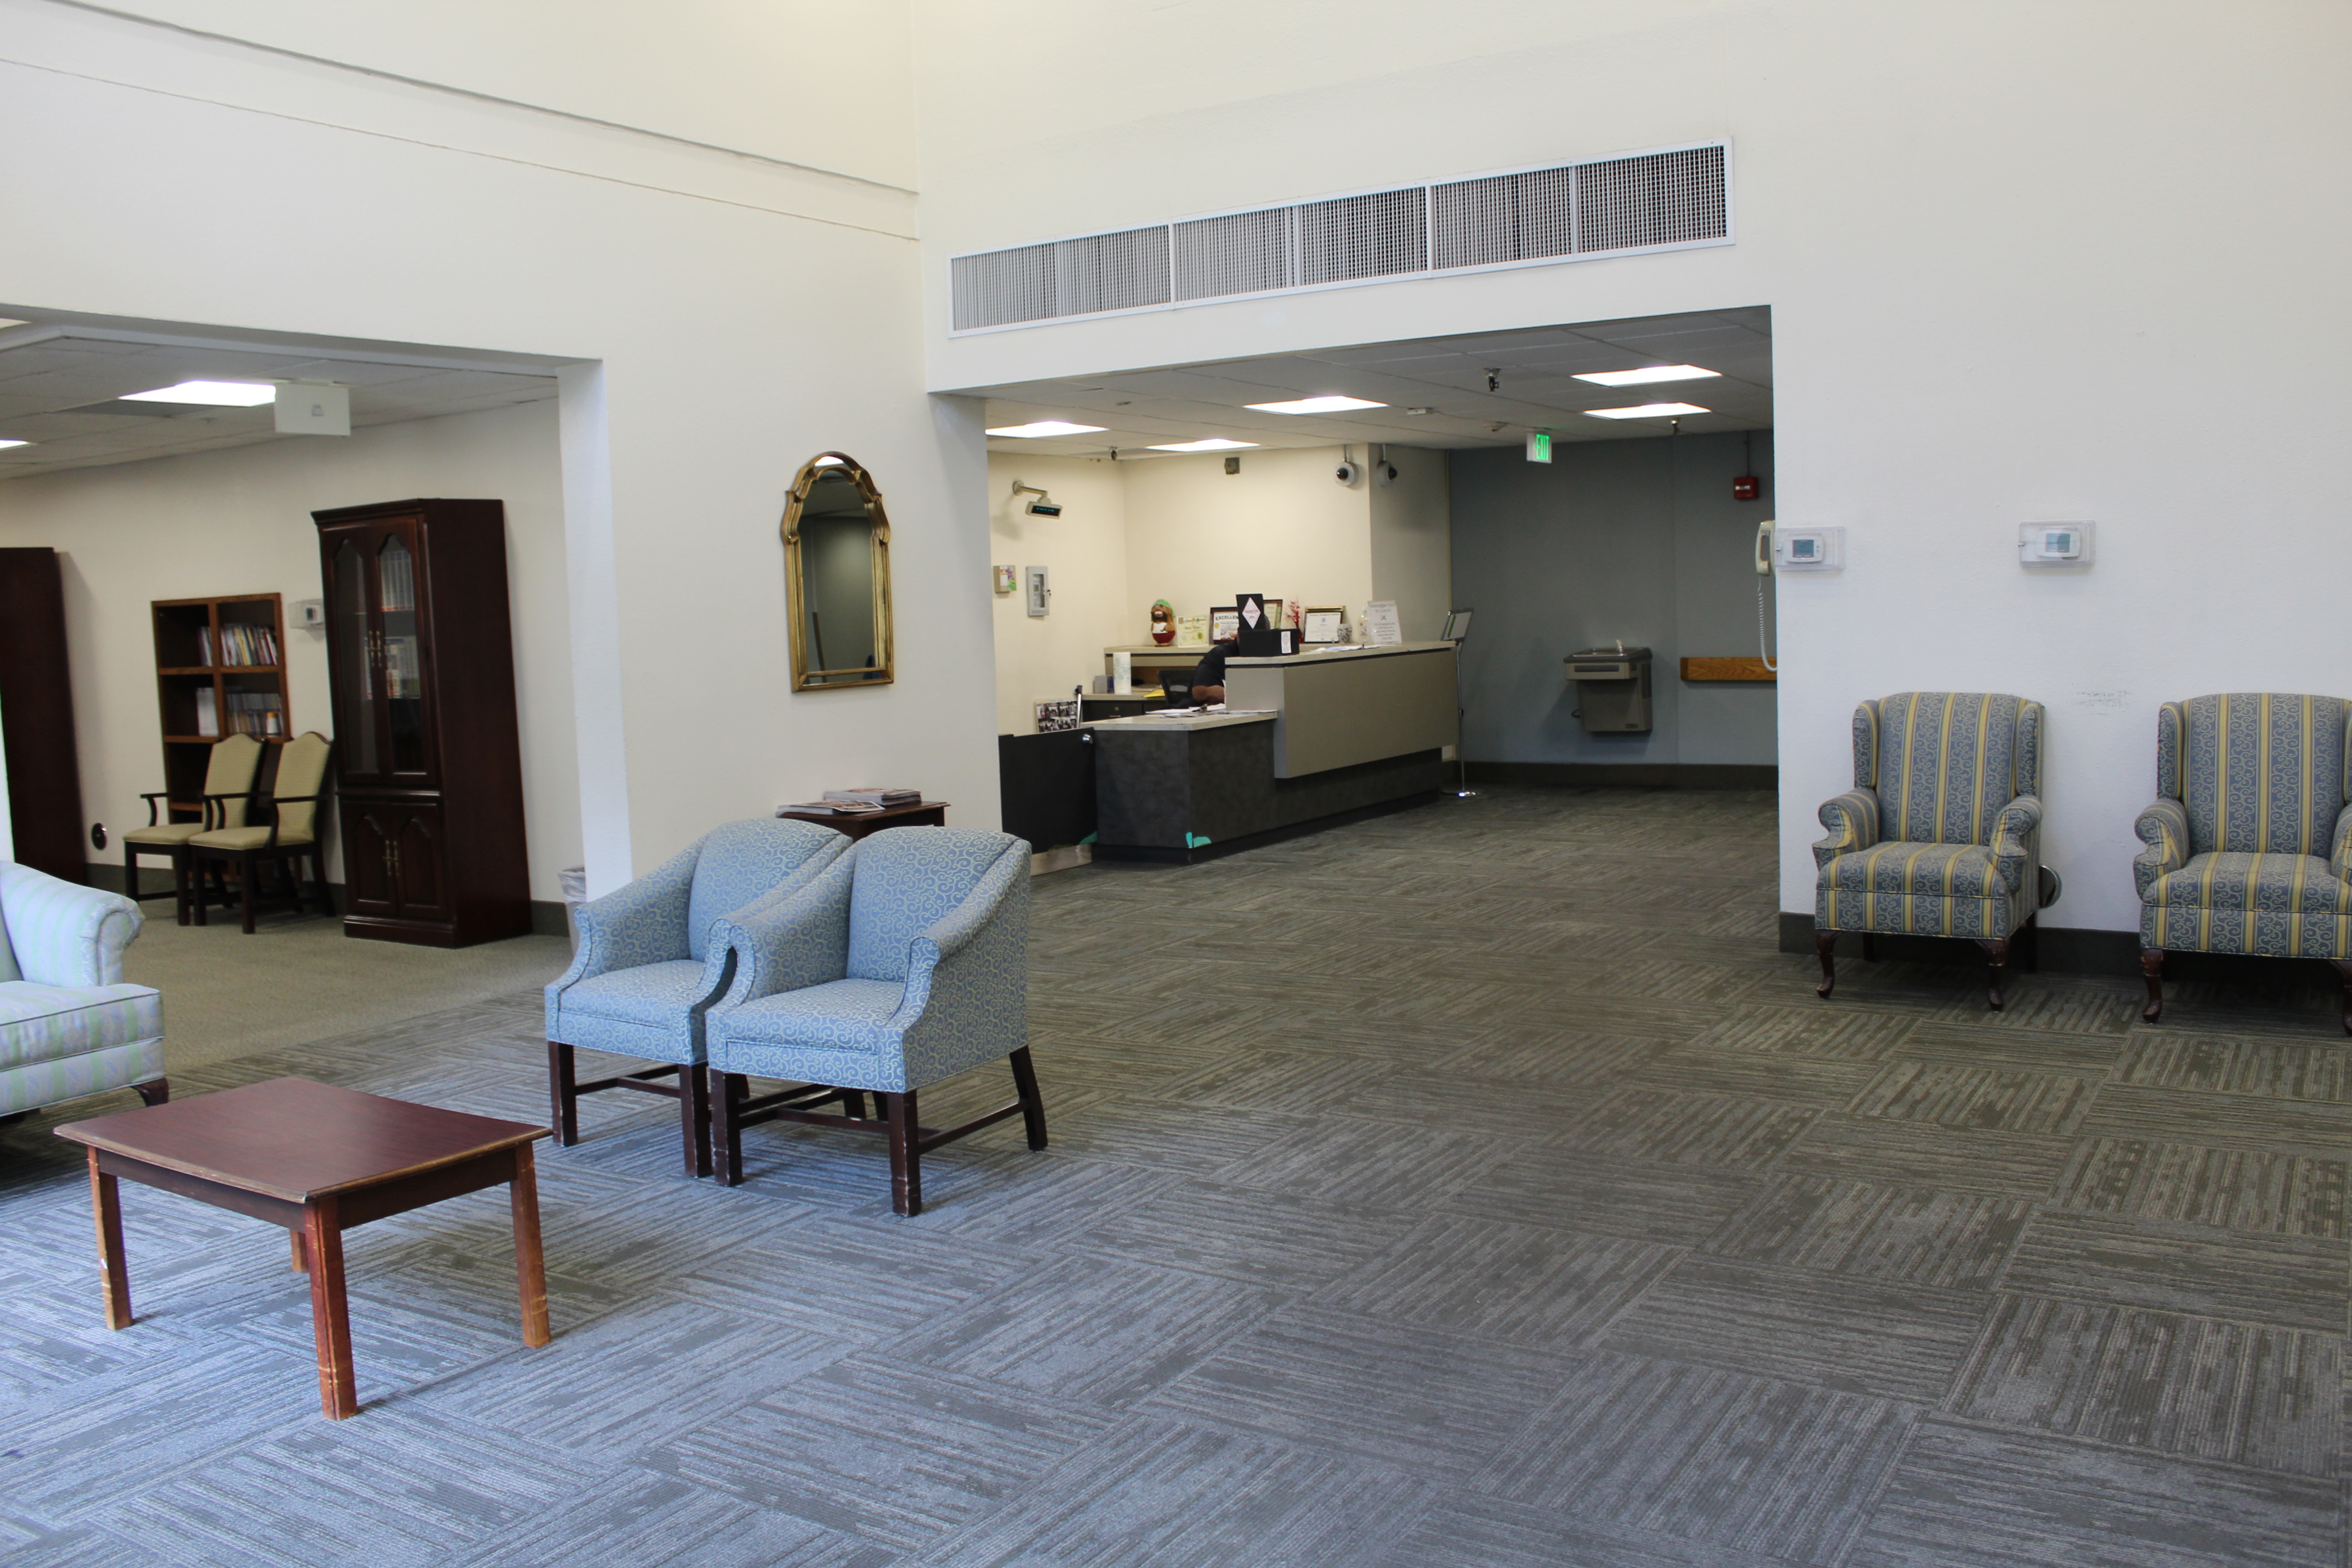 Interior view of community room and Information desk at Angelus Plaza 1. Nuetral colored sofa chairs, brown coffee table, dark brown curio cabinet , and a mirror hanging on a wall